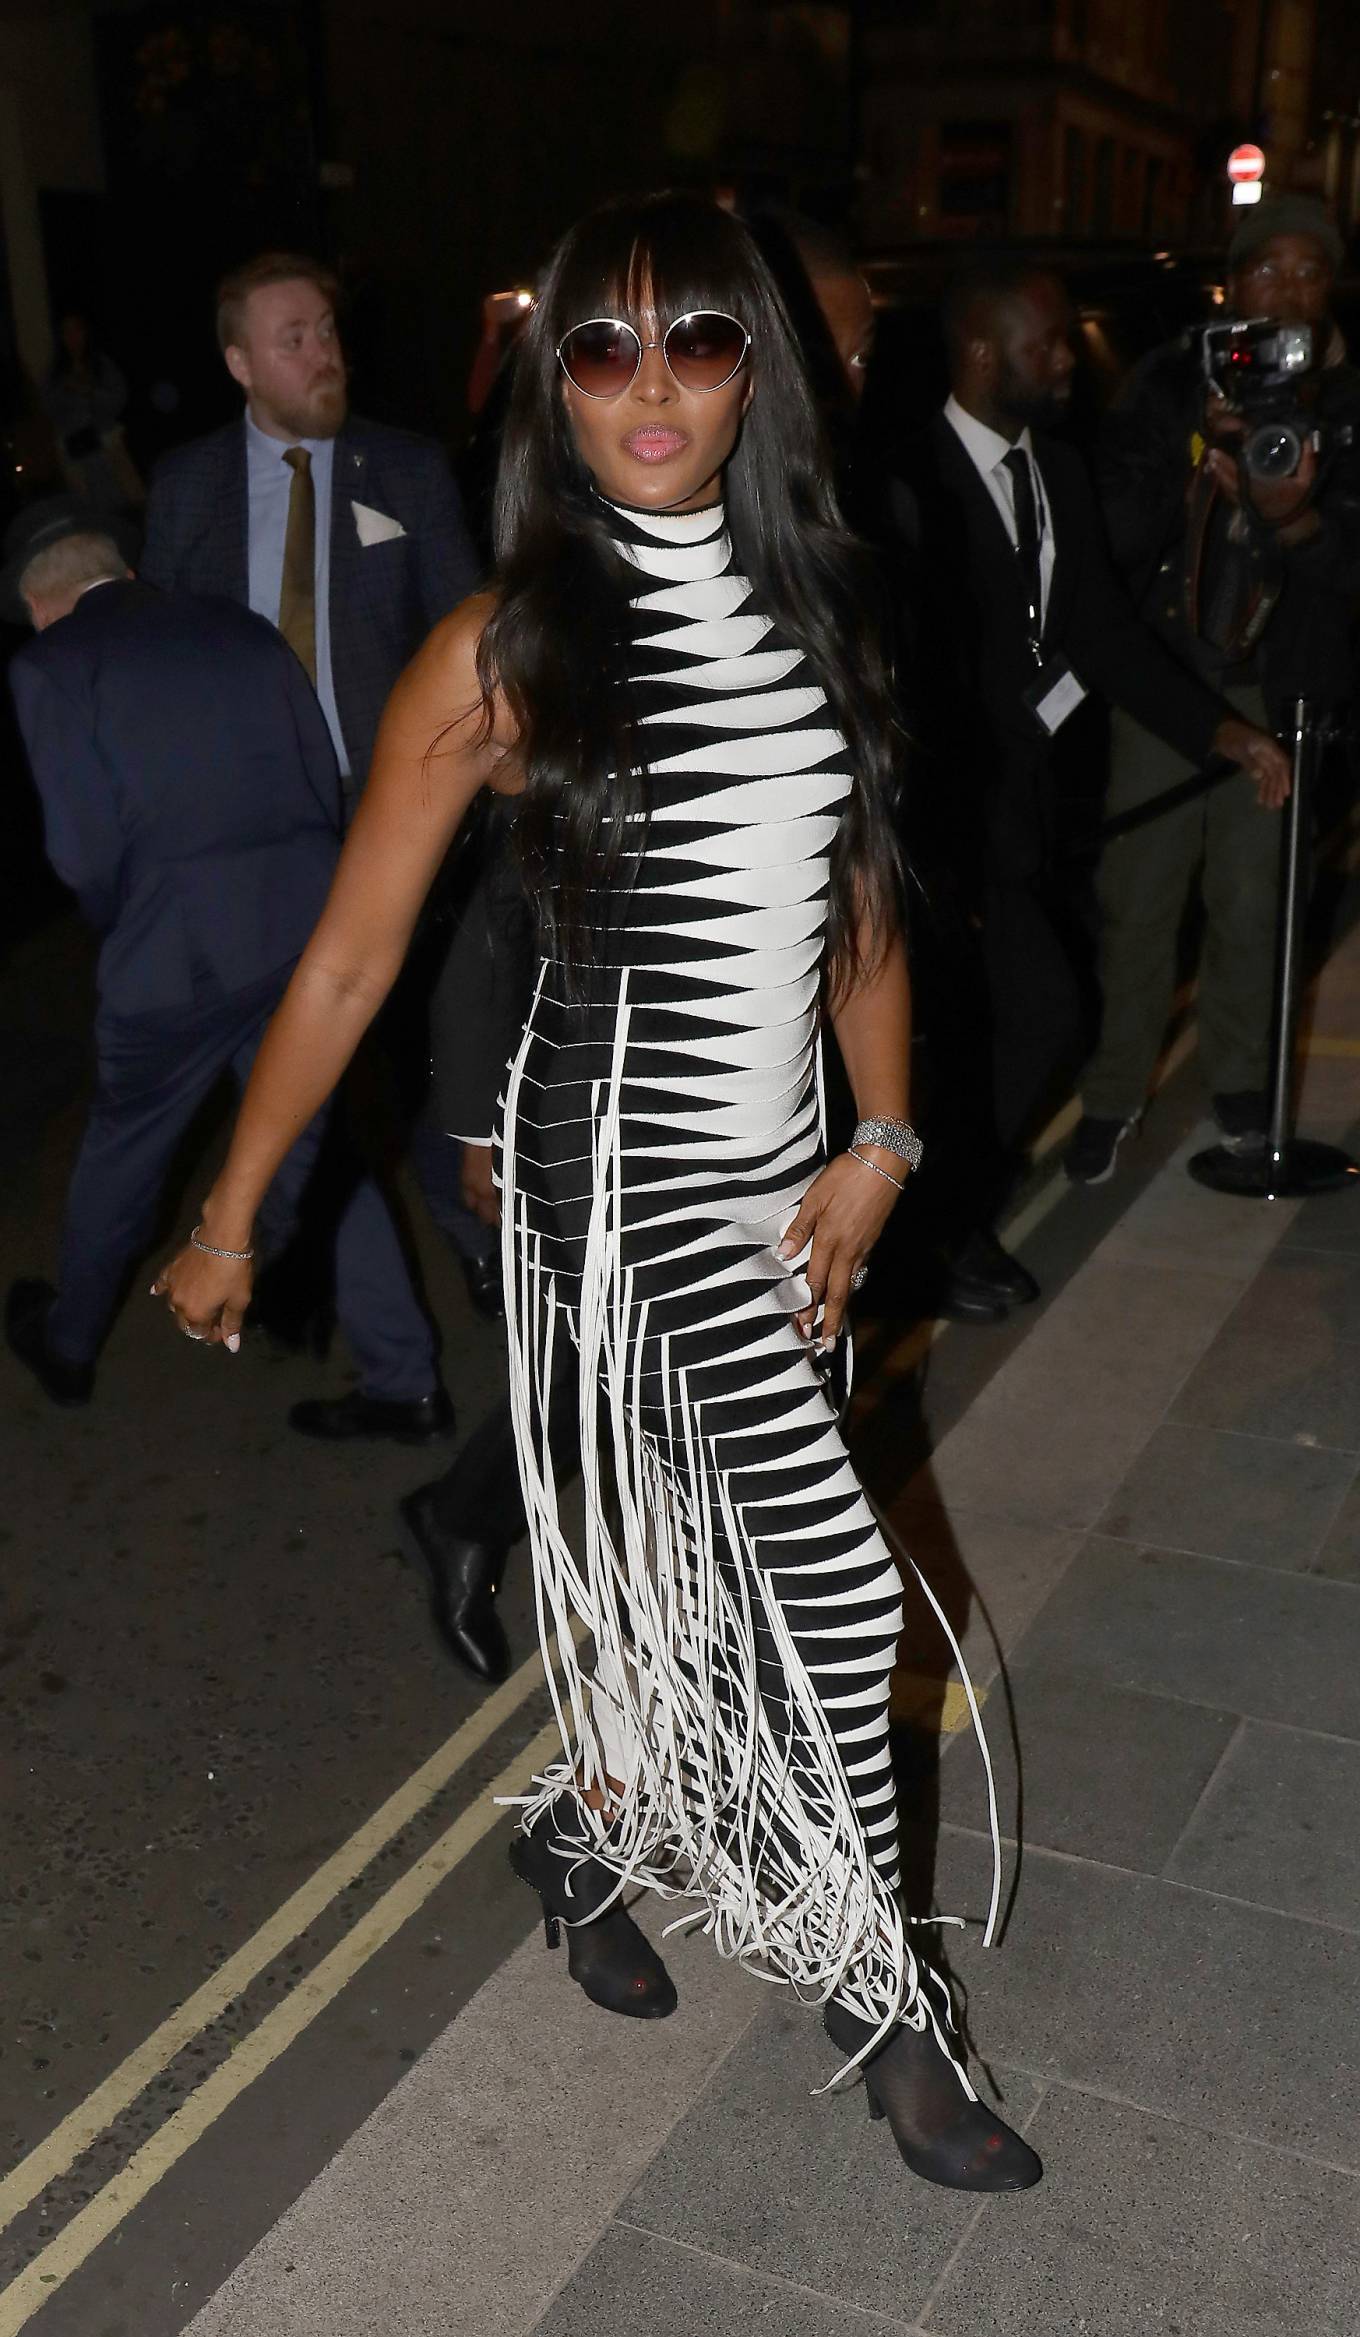 Naomi Campbell 2021 : Naomi Campbell – British Vogue and Tiffany Co celebrate Fashion and Film at the Londoner Hotel-08